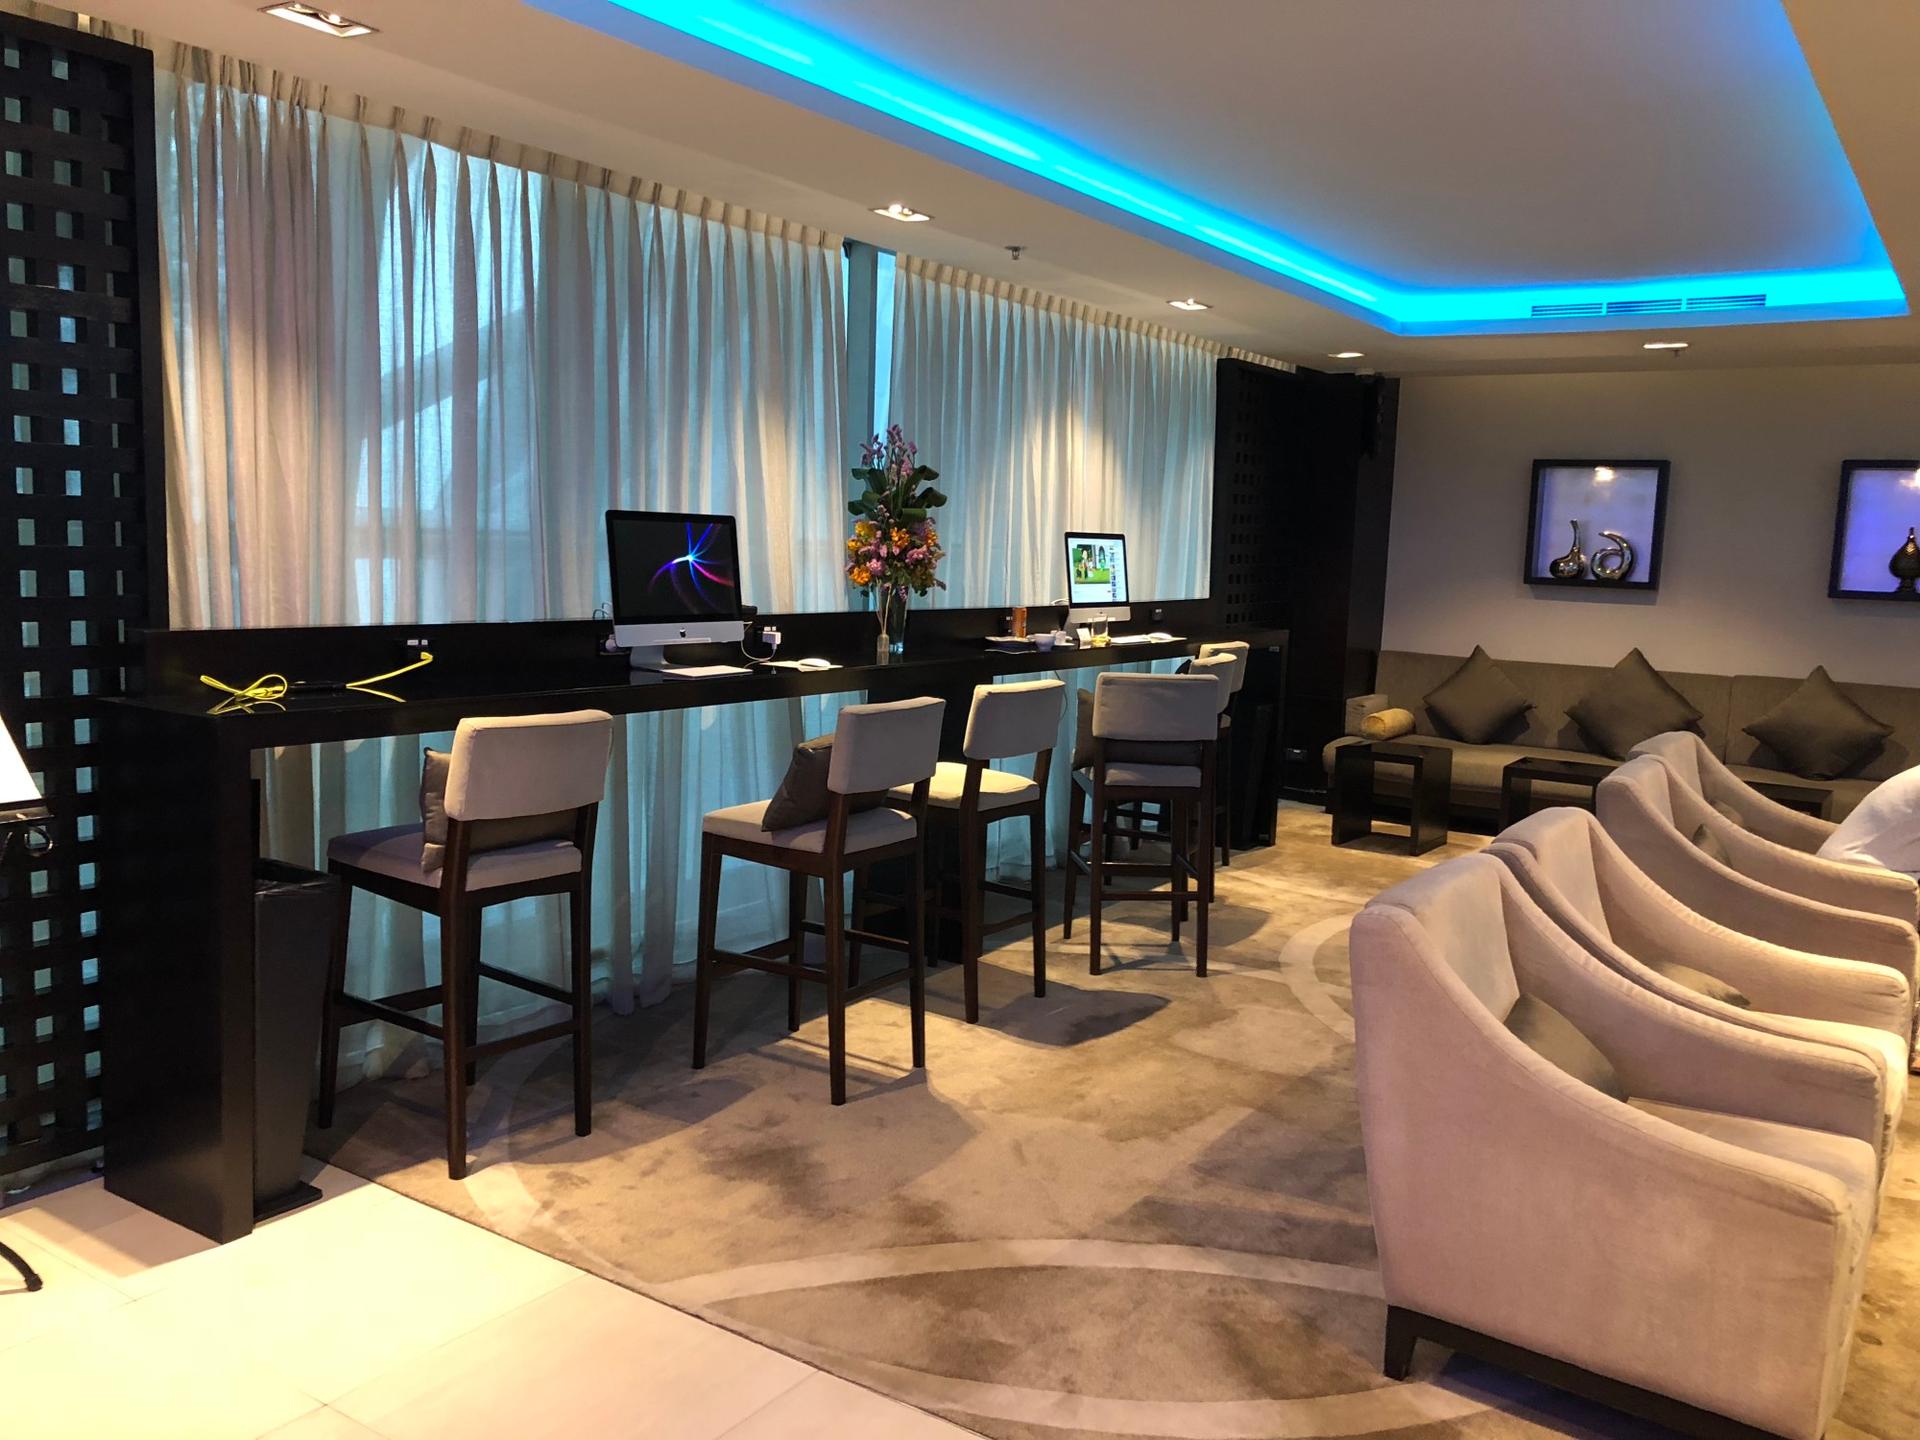 Oman Air First and Business Class Lounge image 29 of 42